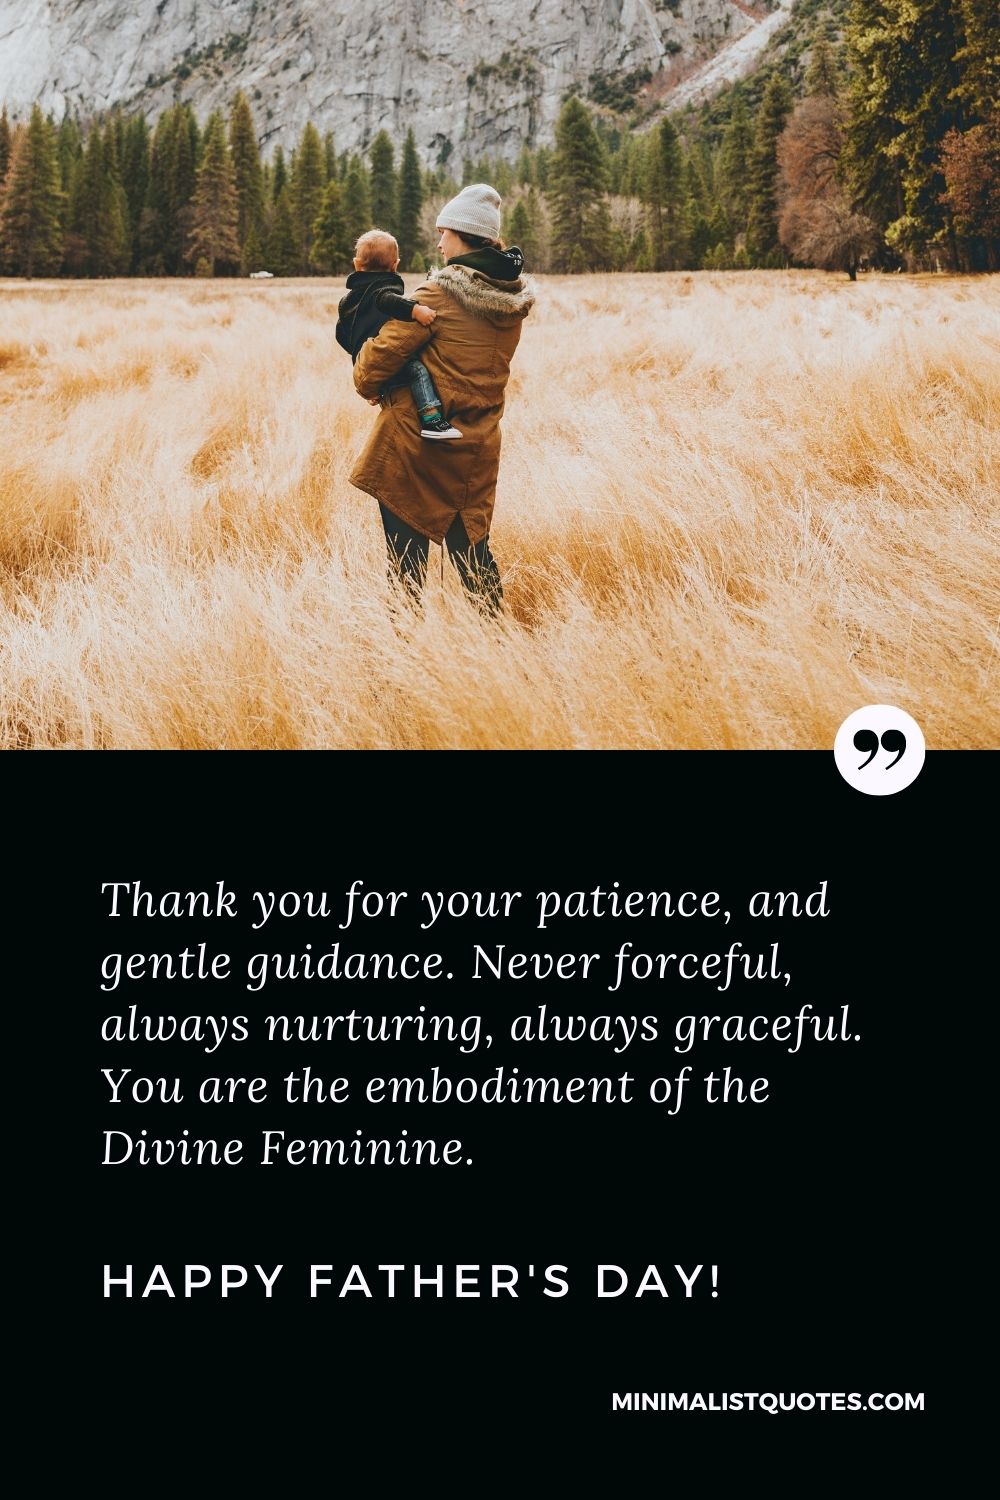 Mothers Day Quote, Wish, Message With Image: Thank you for your patience and gentle guidance. Never forceful, always nurturing, always graceful. You are the embodiment of the Divine Feminine. Happy Mothers Day!